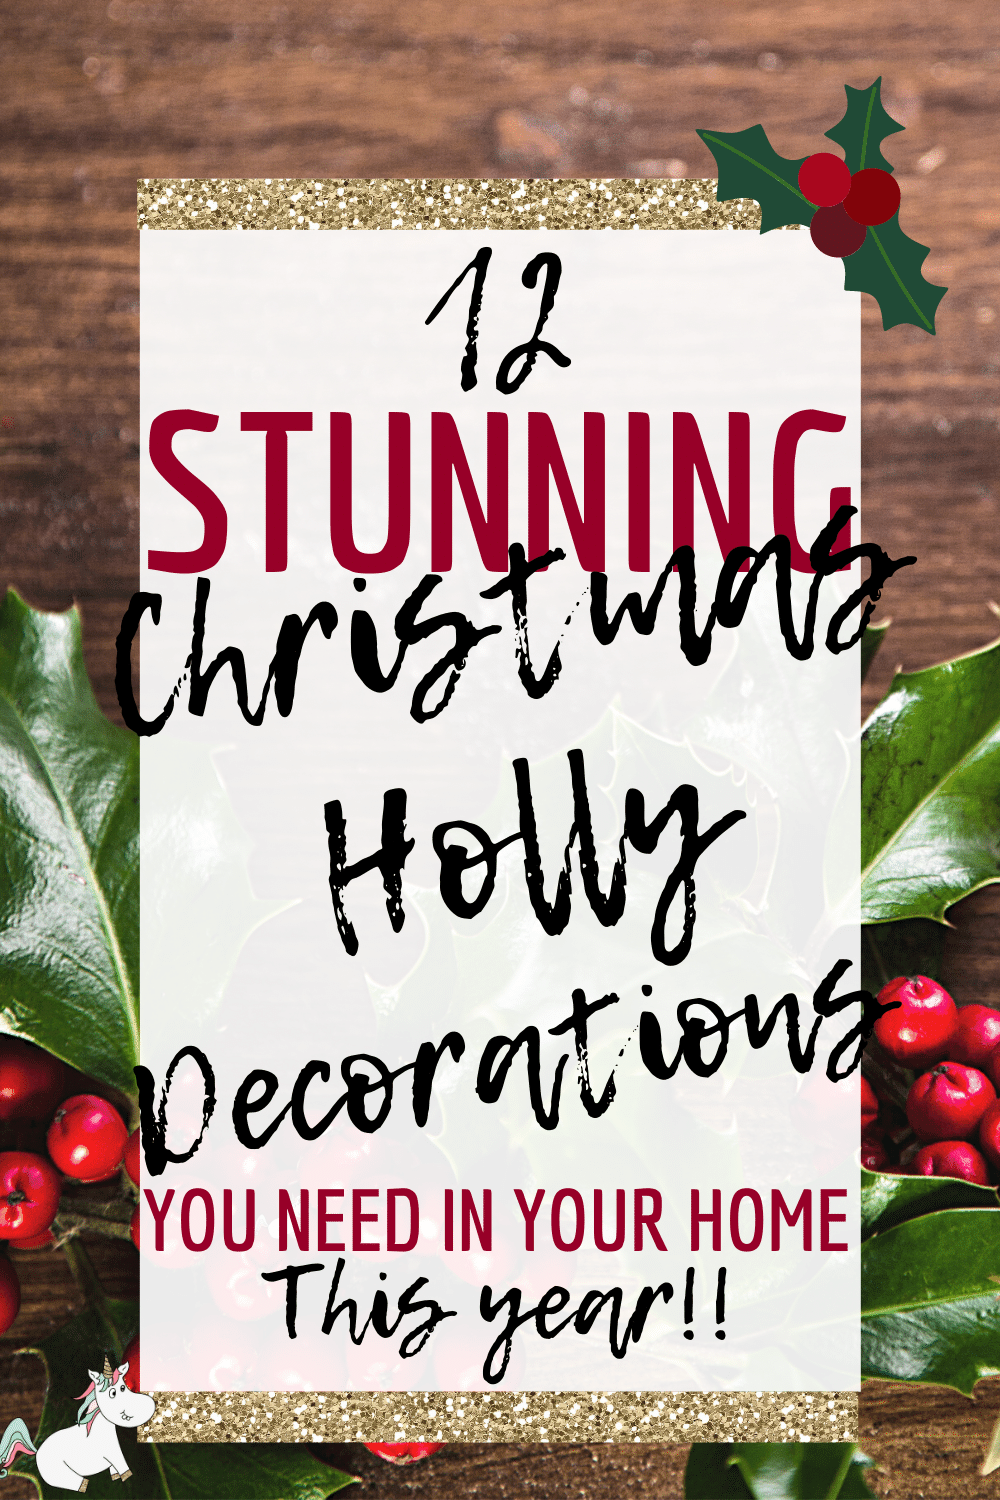 12 Stunning Christmas Holly Decorations You Need In Your Home This Year! Whether you're looking for a stunning holly wreath for your front door, beautiful hanging decorations for your Christmas tree, or a holiday centerpiece for your table this festive season, we have it covered.